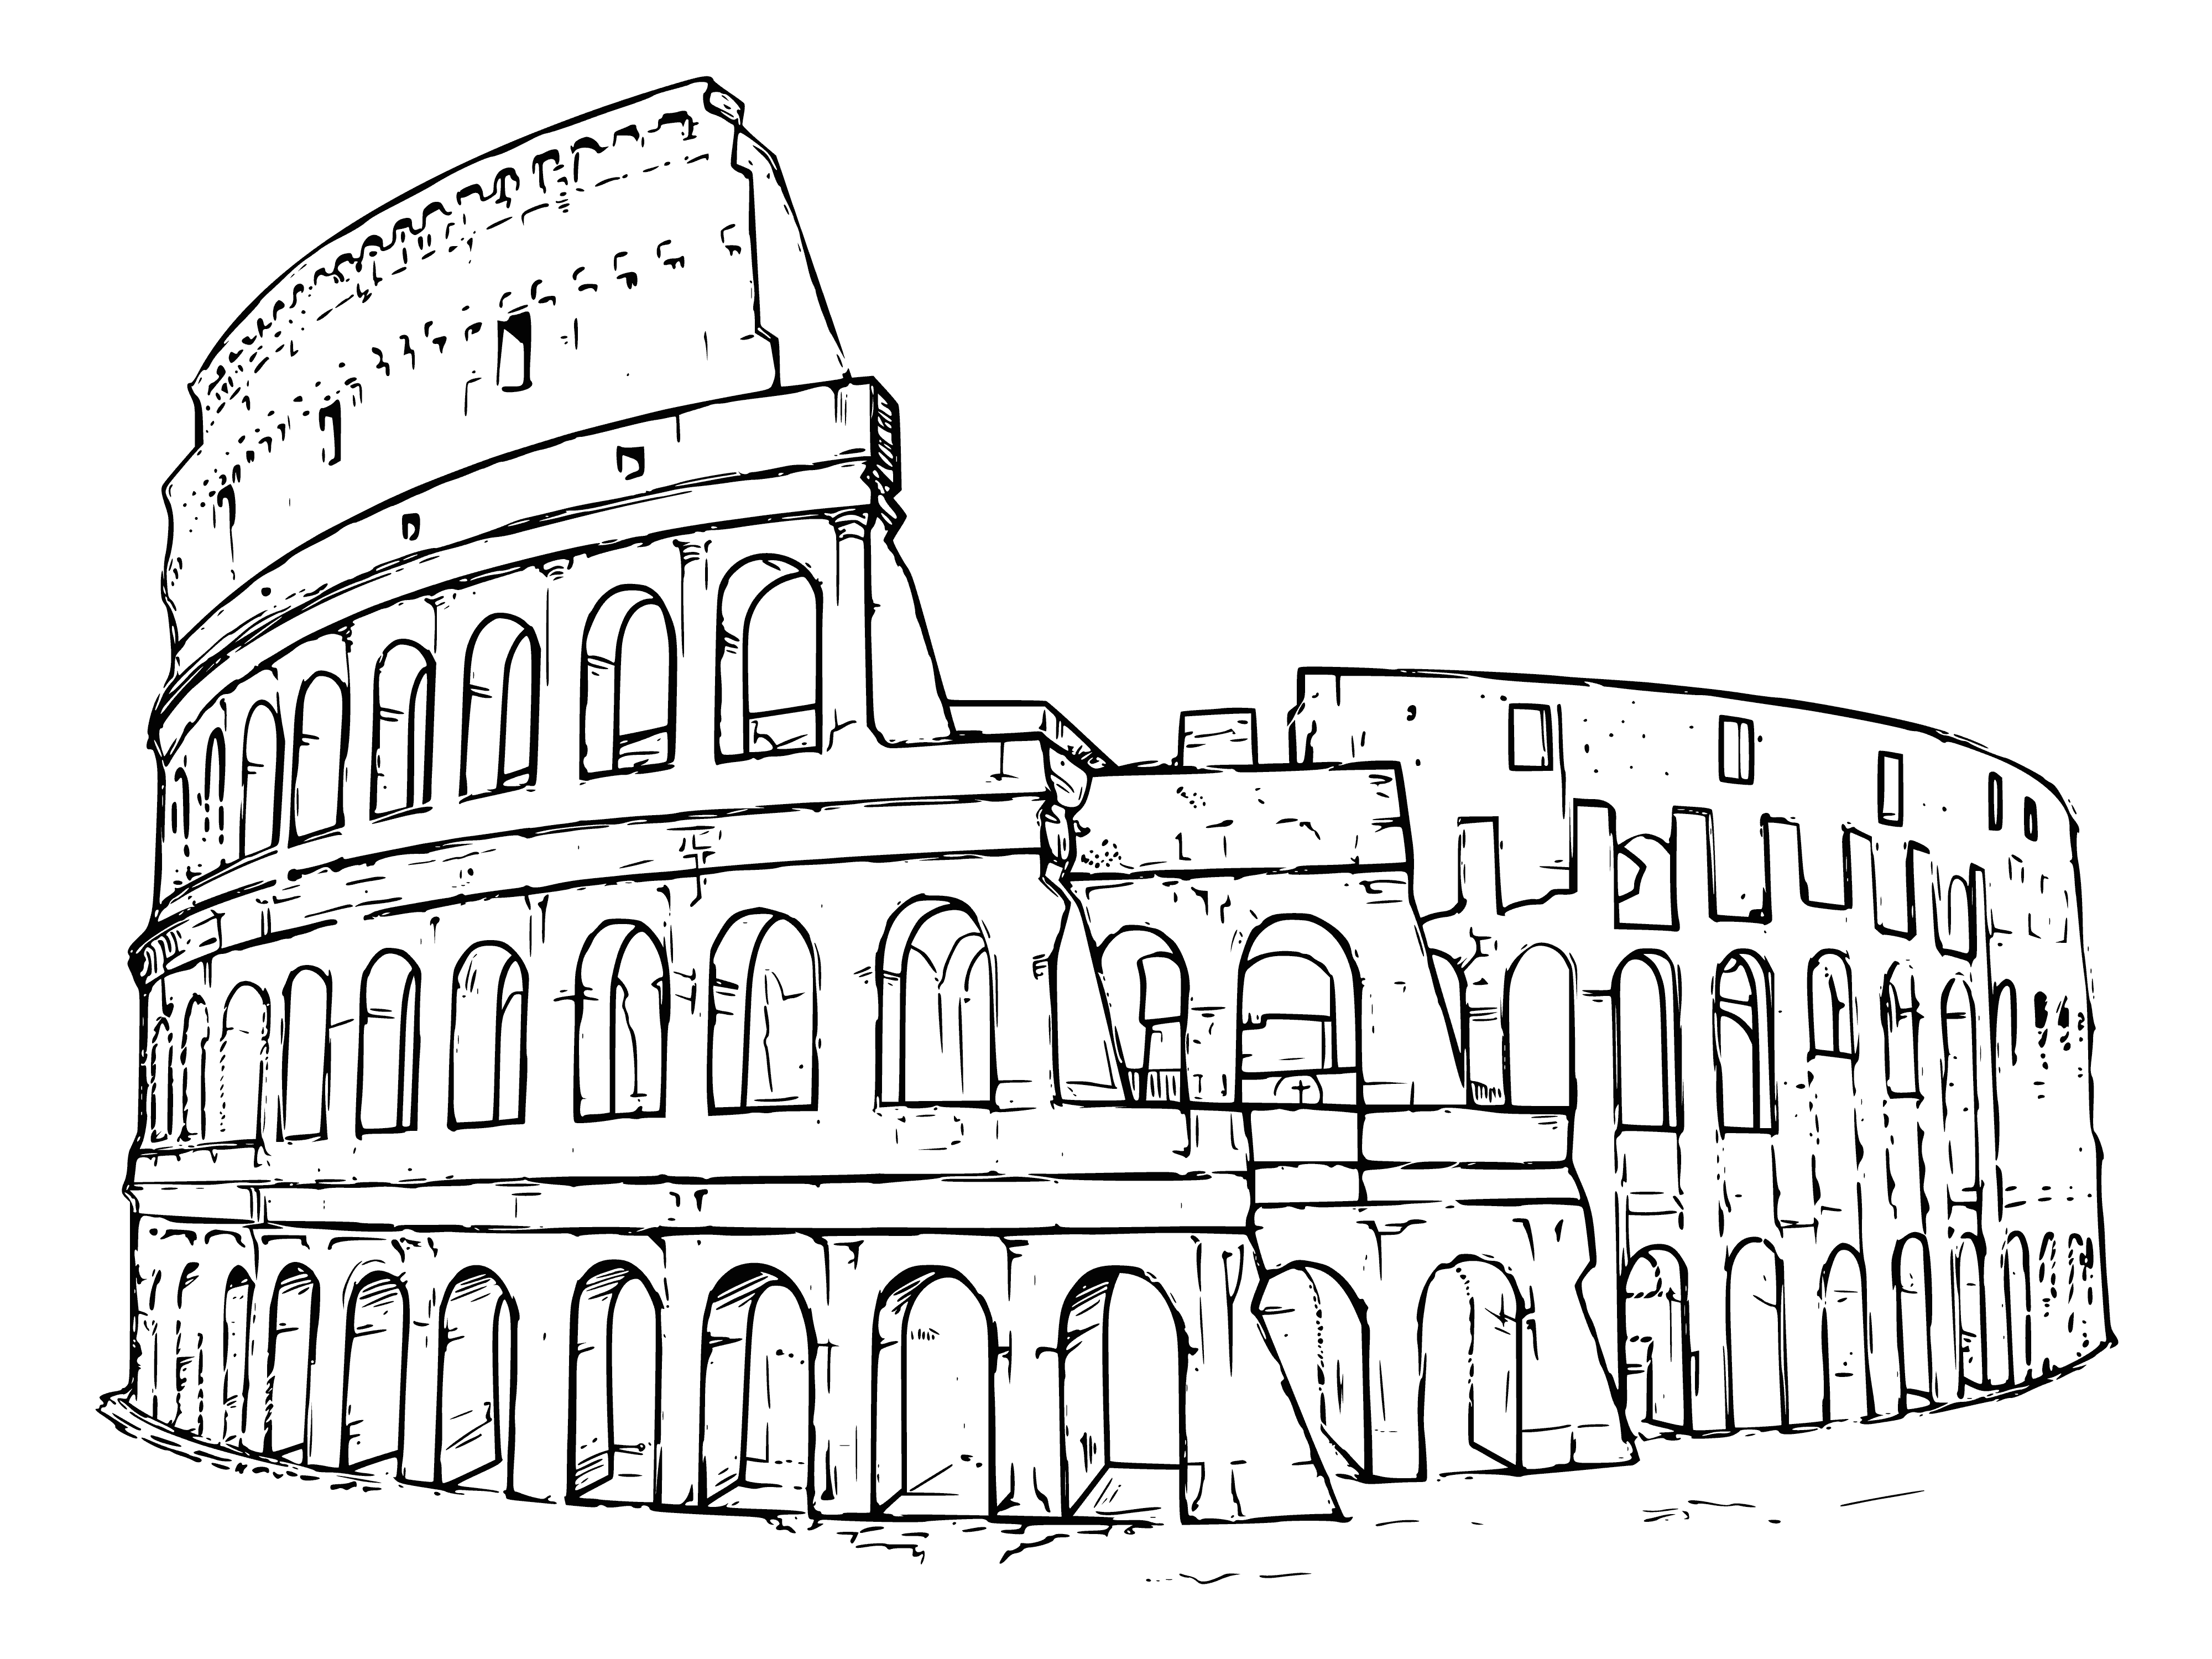 coloring page: The Colosseum is an ancient amphitheater in Rome, considered one of the greatest works of Roman architecture. It is elliptical in shape with 80 entrances and could seat up to 50,000.